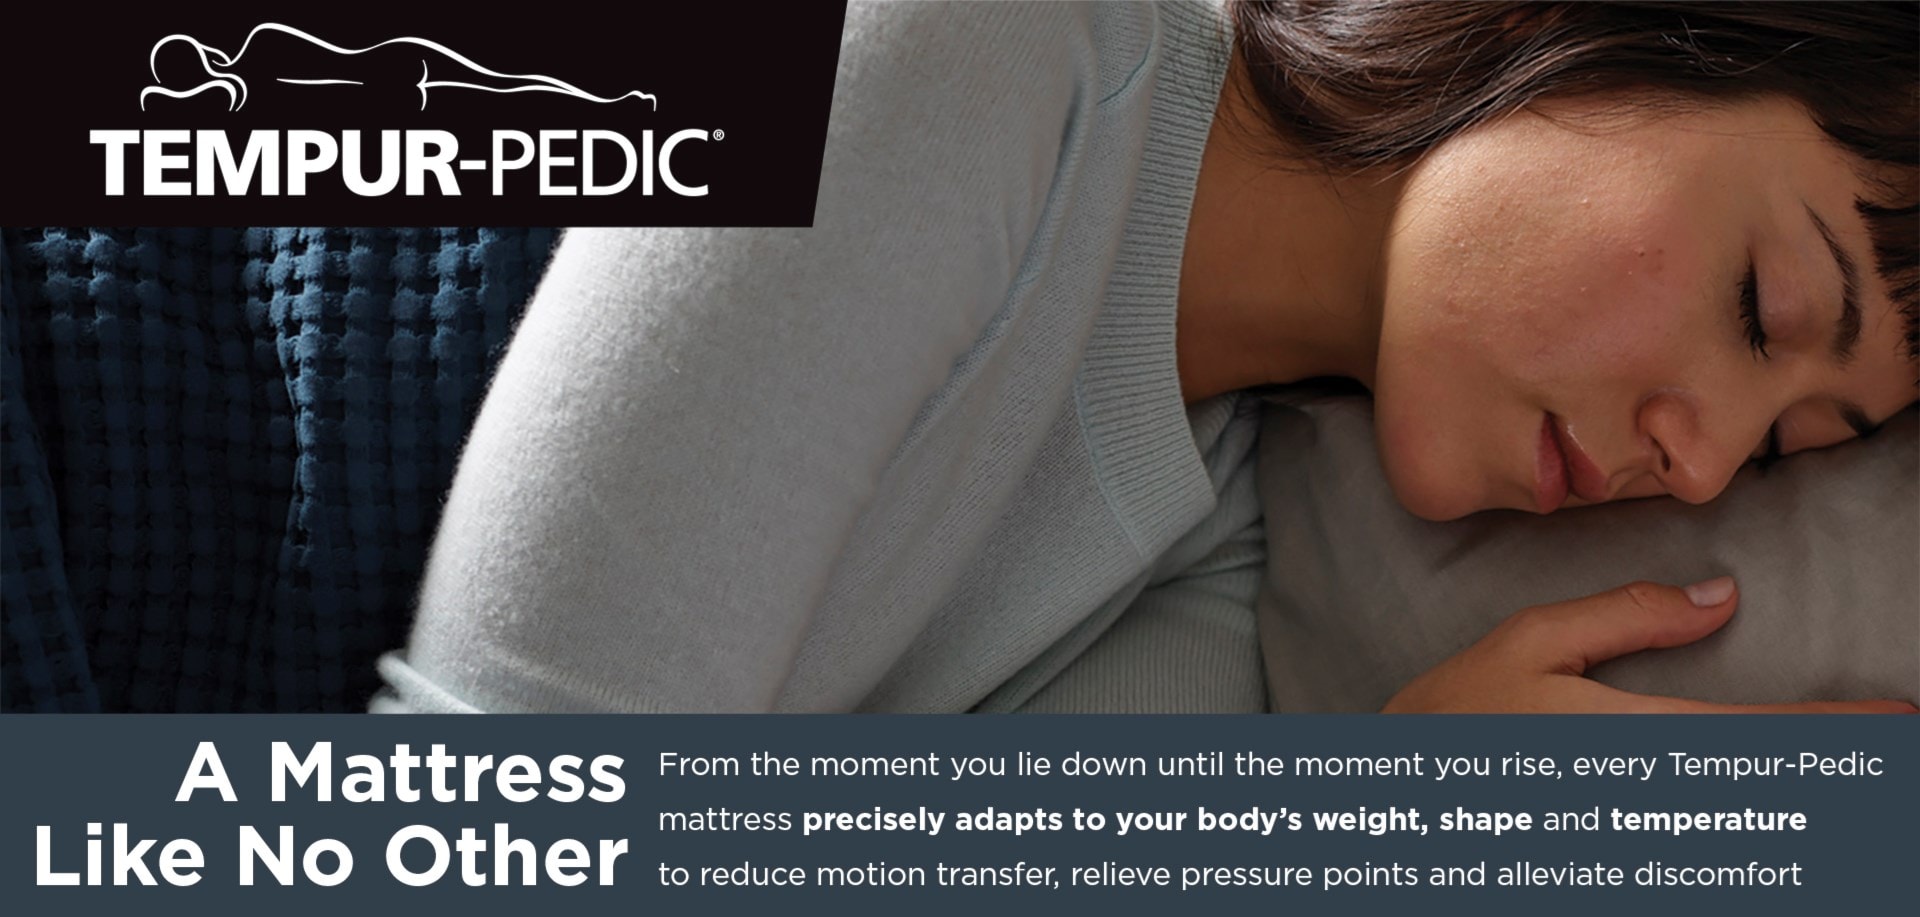 Tempur-Pedic | A Mattress Like No Other | From the moment you lie down until the moment you rise, every Tempur-Pedic mattress precisely adapts to your body's weight, shape, and tempurature to reduce motion transfer, relieve pressure points and alleviate discomfort.